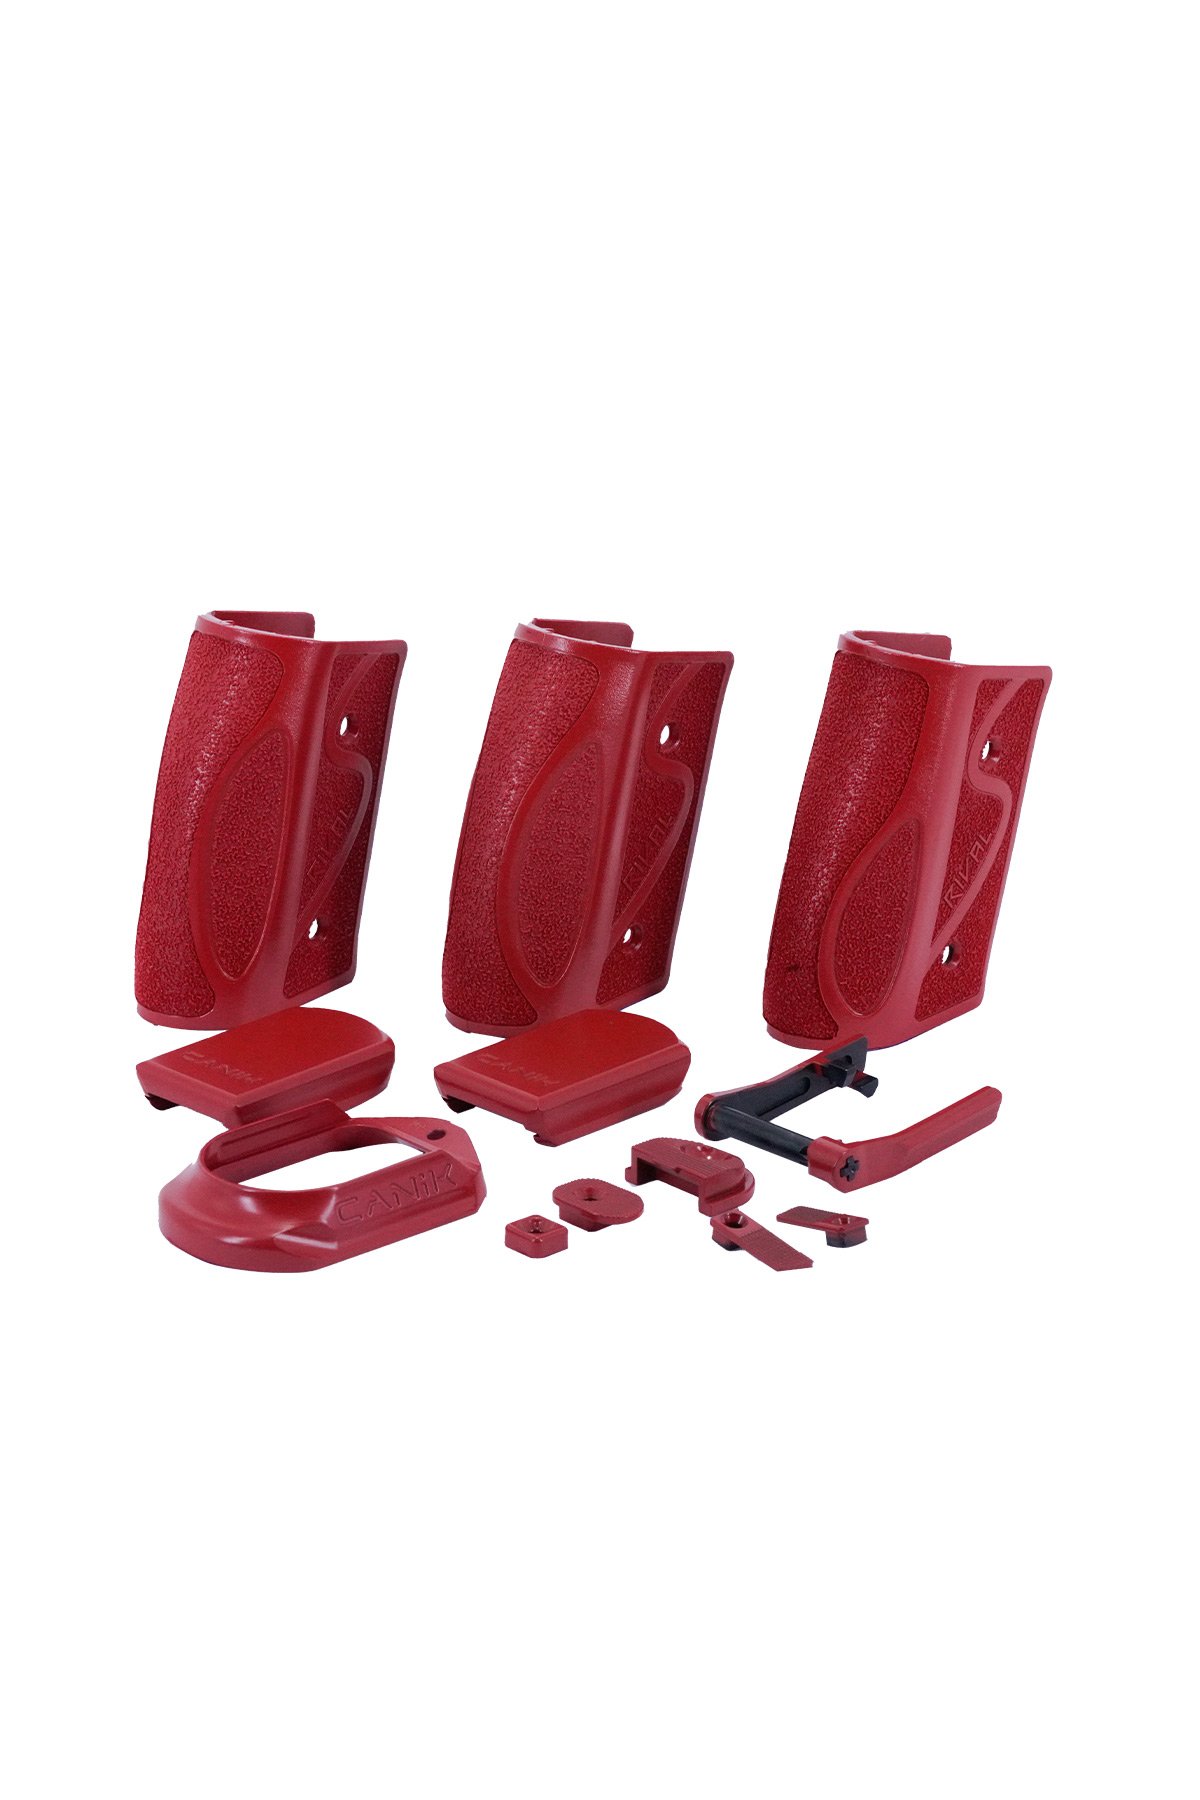 SFx RIVAL-S Color Pack - Red